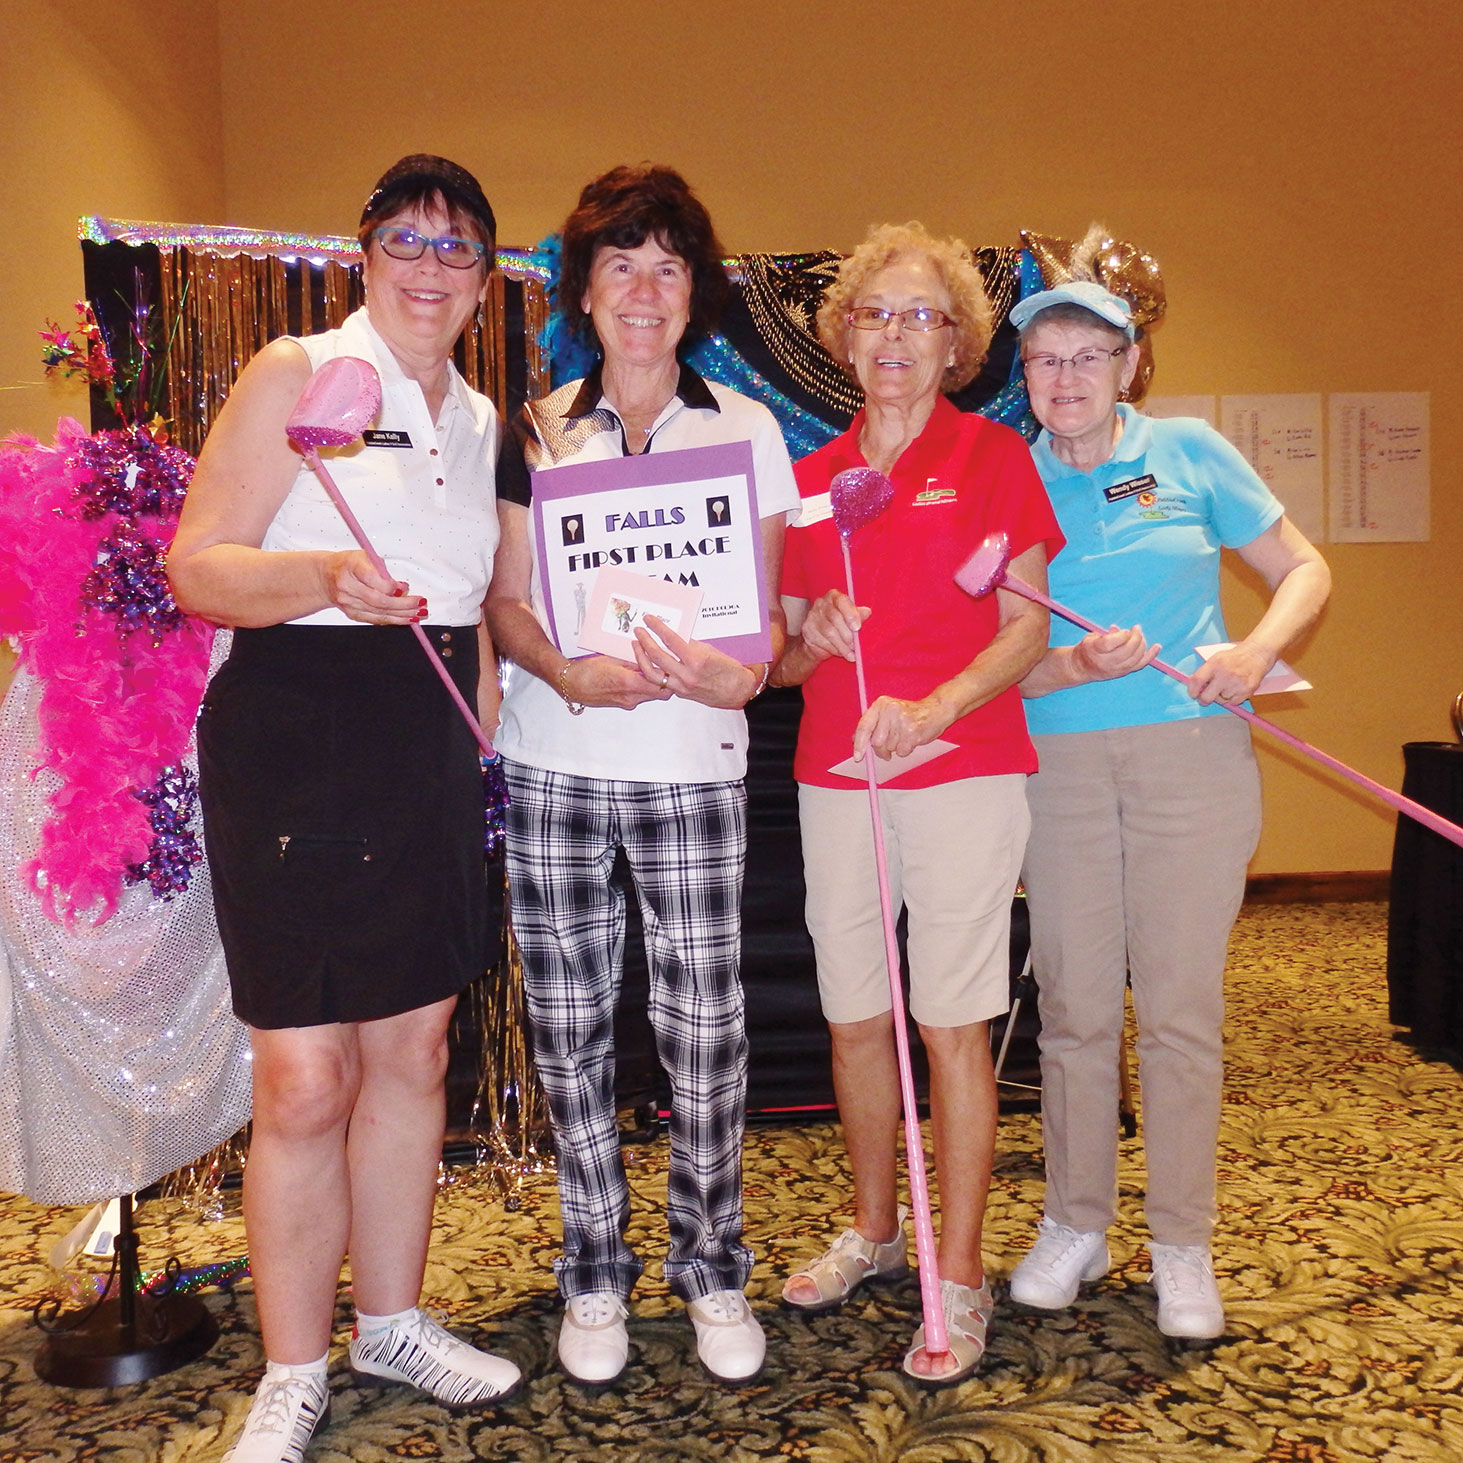 First Place Falls, left to right: Jane Kelly, Christi Houser, Guest Player, Wendy Wisser